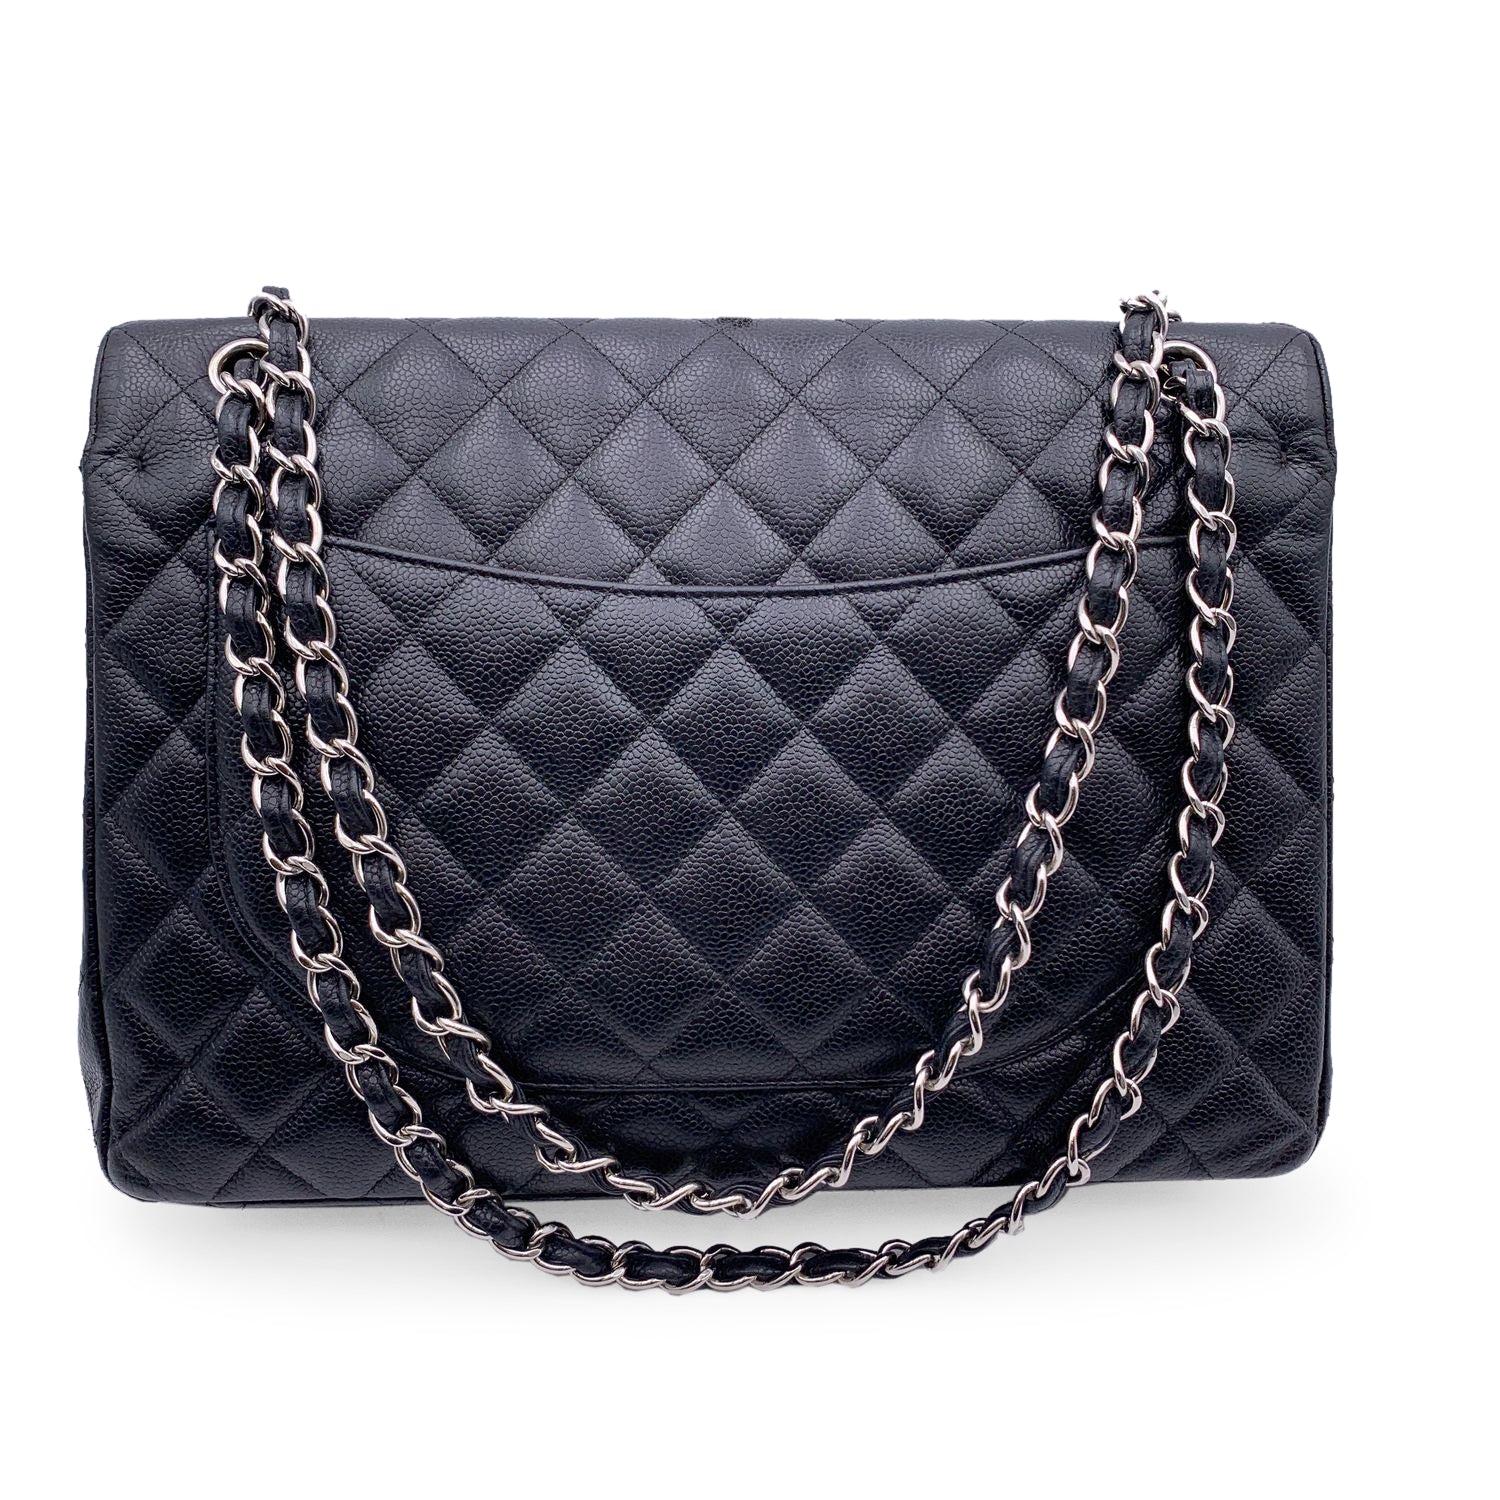 This beautiful Bag will come with a Certificate of Authenticity provided by Entrupy. The certificate will be provided at no further cost Chanel 'Maxi' Timeless Classic Quilted Double Flap Maxi Timeless 2.55 Bag. Black quilted caviar leather. Silver